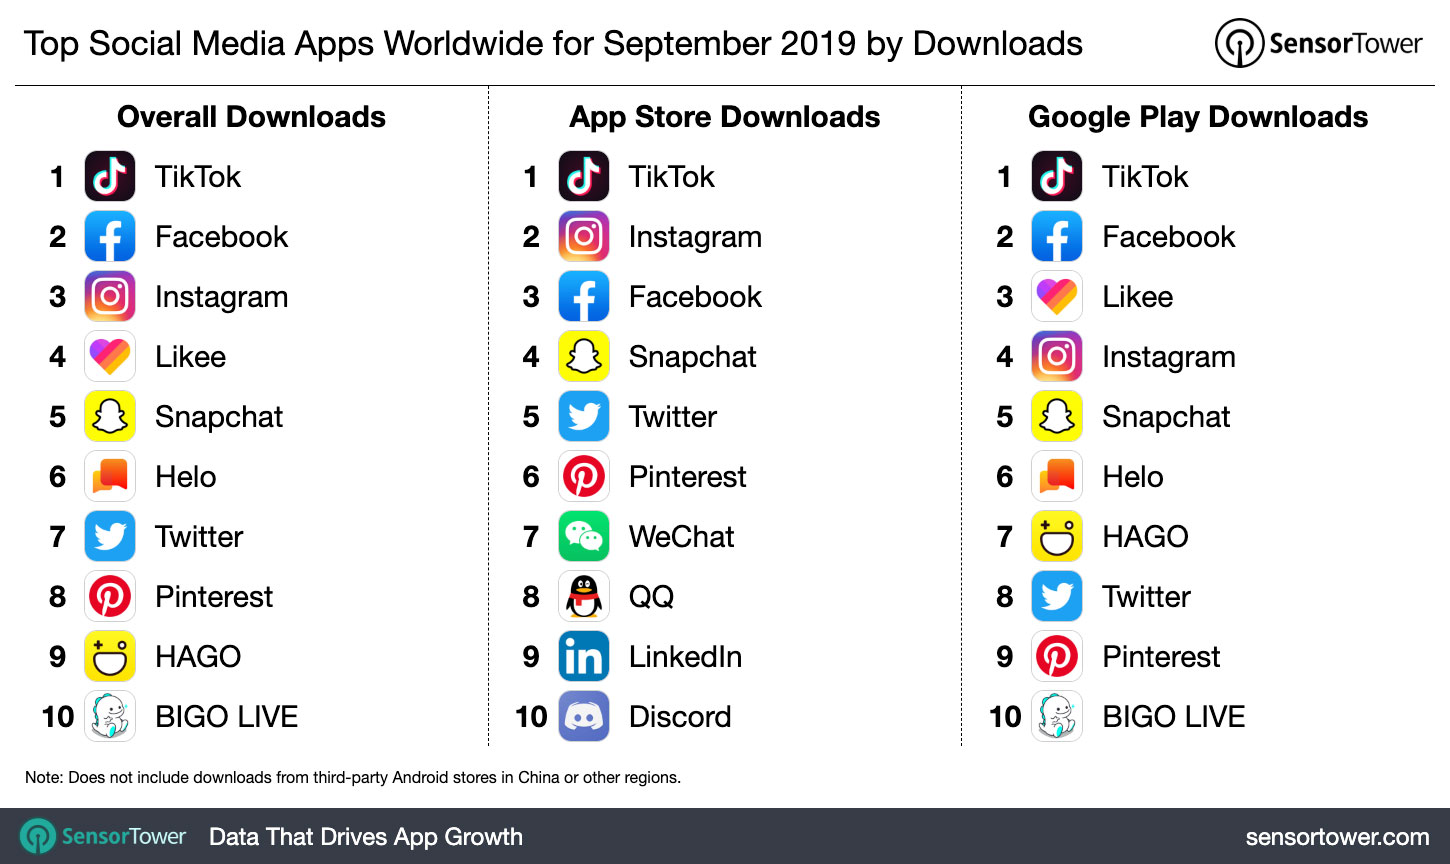 Top Social Media Apps Worldwide for September 2019 by Downloads